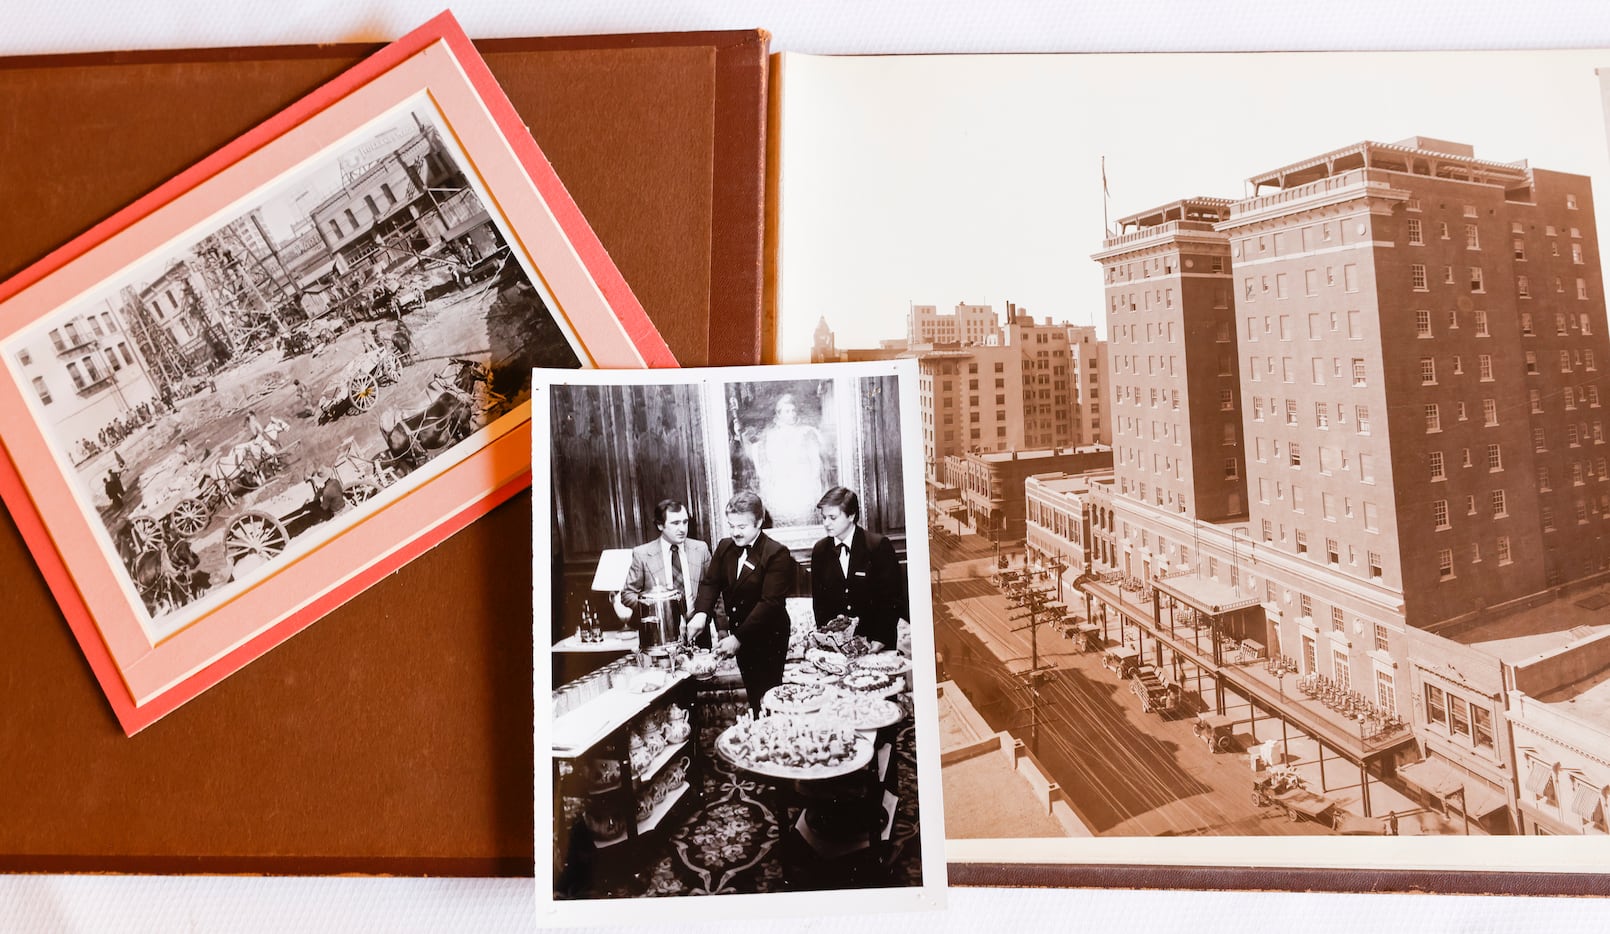 Archived photos from the past at the Adolphus Hotel in Dallas on Thursday, Oct. 13, 2022.